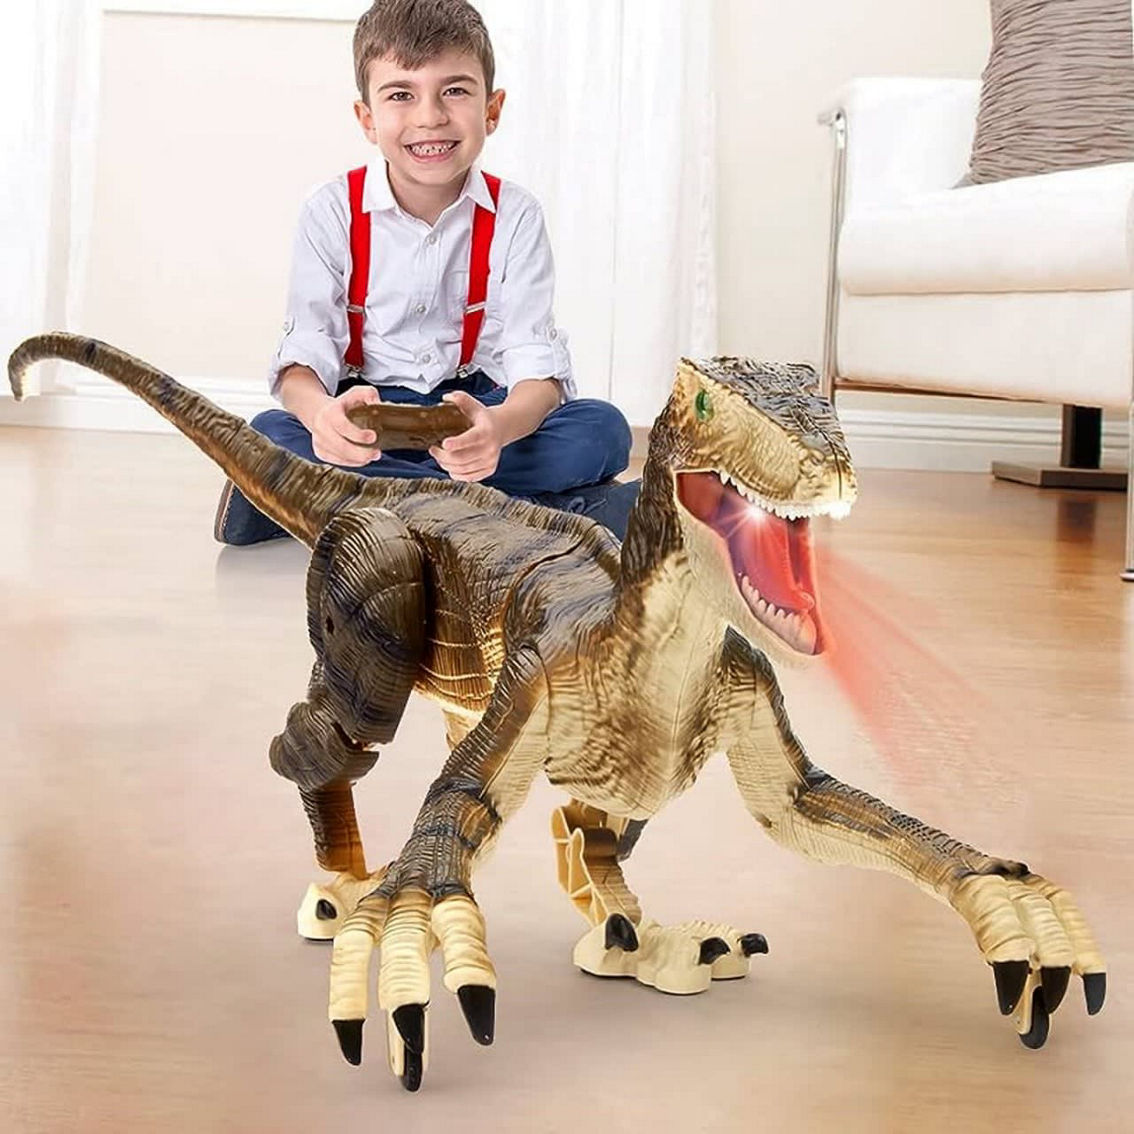 SM180-Br Remote control Dinosaur with lights and sound - Image 5 of 5